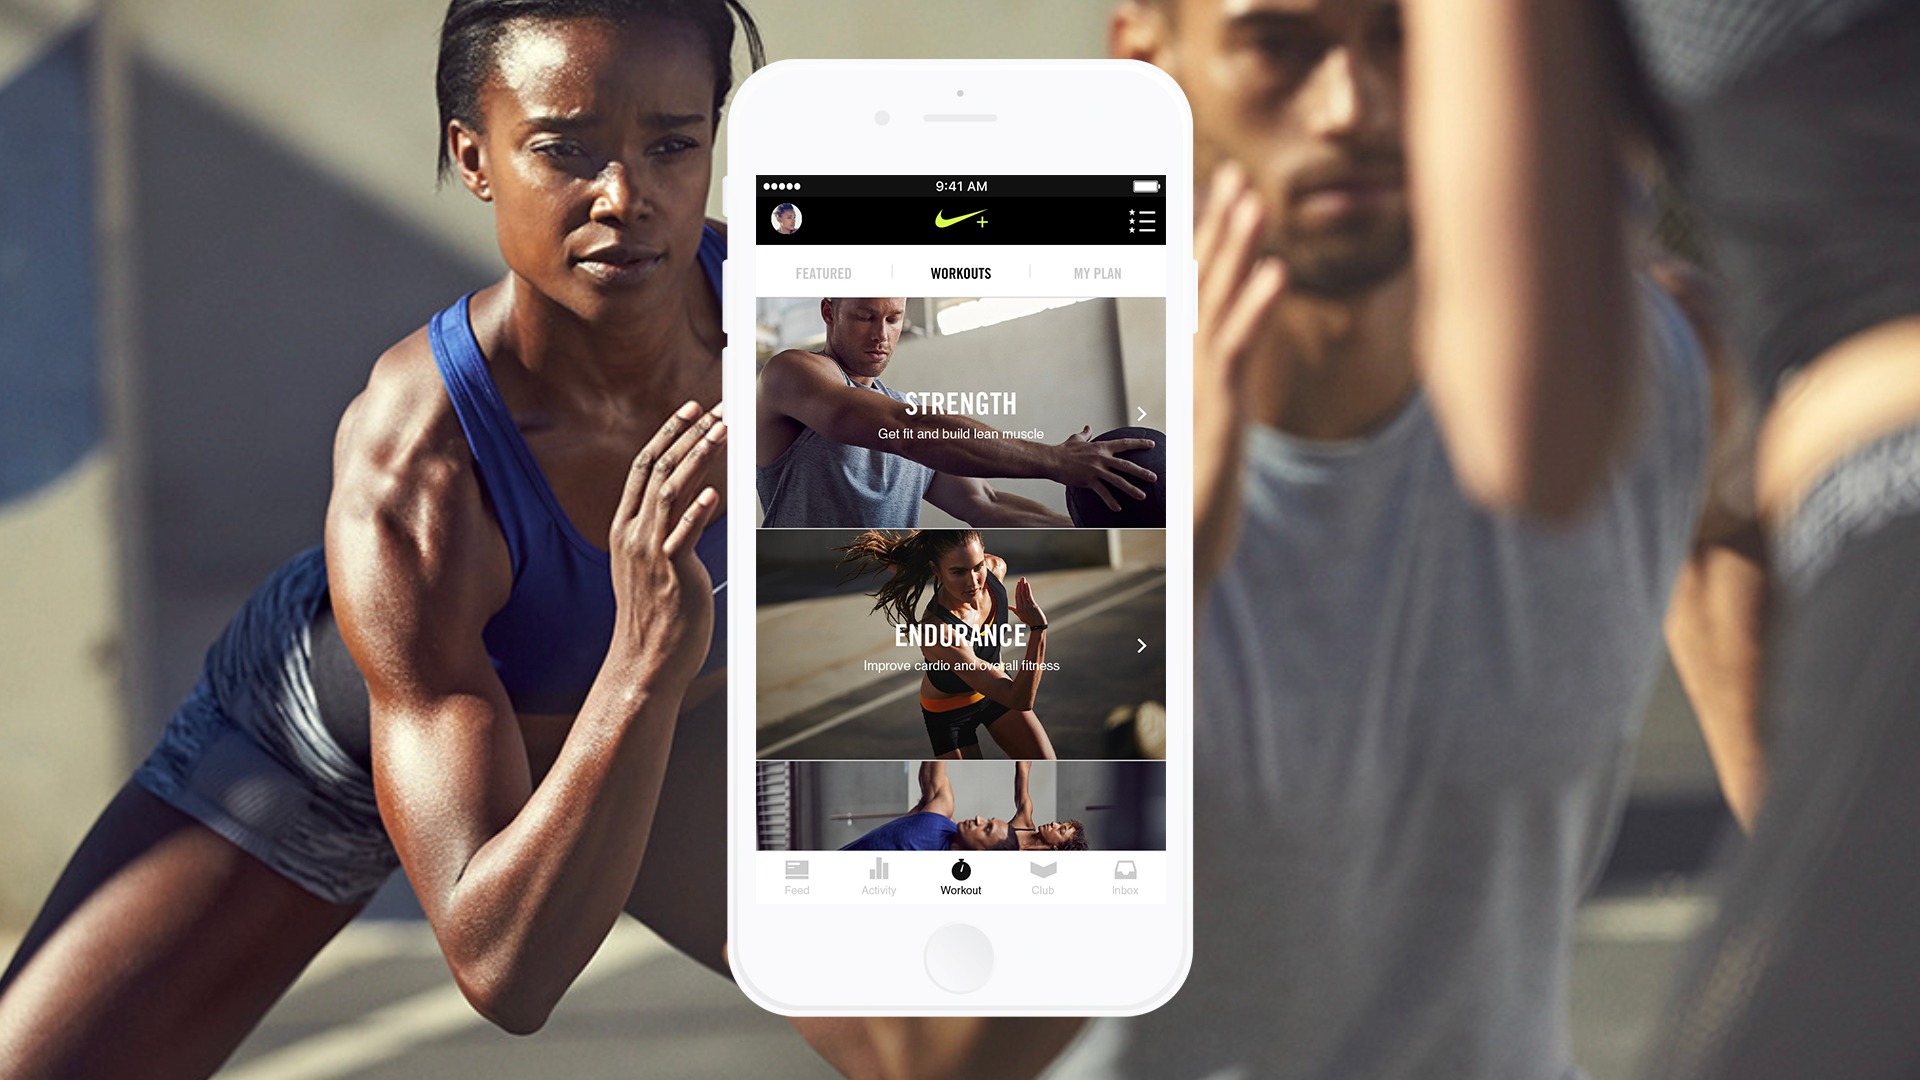 ntc personal trainer